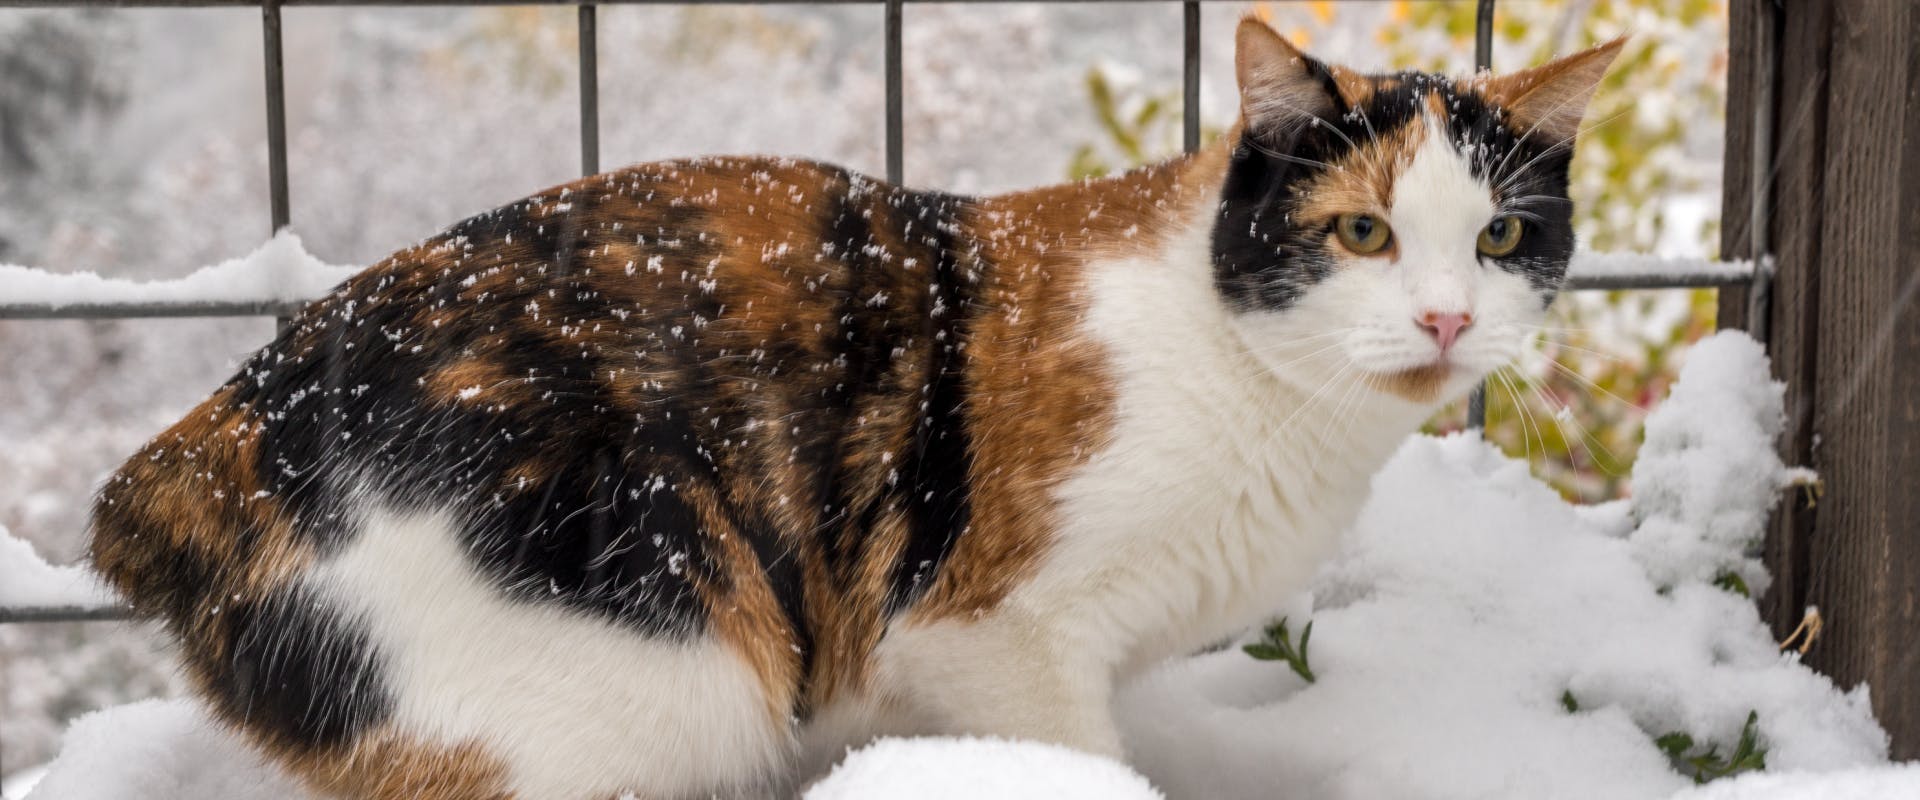 Manx cat with a calico coat in the snow